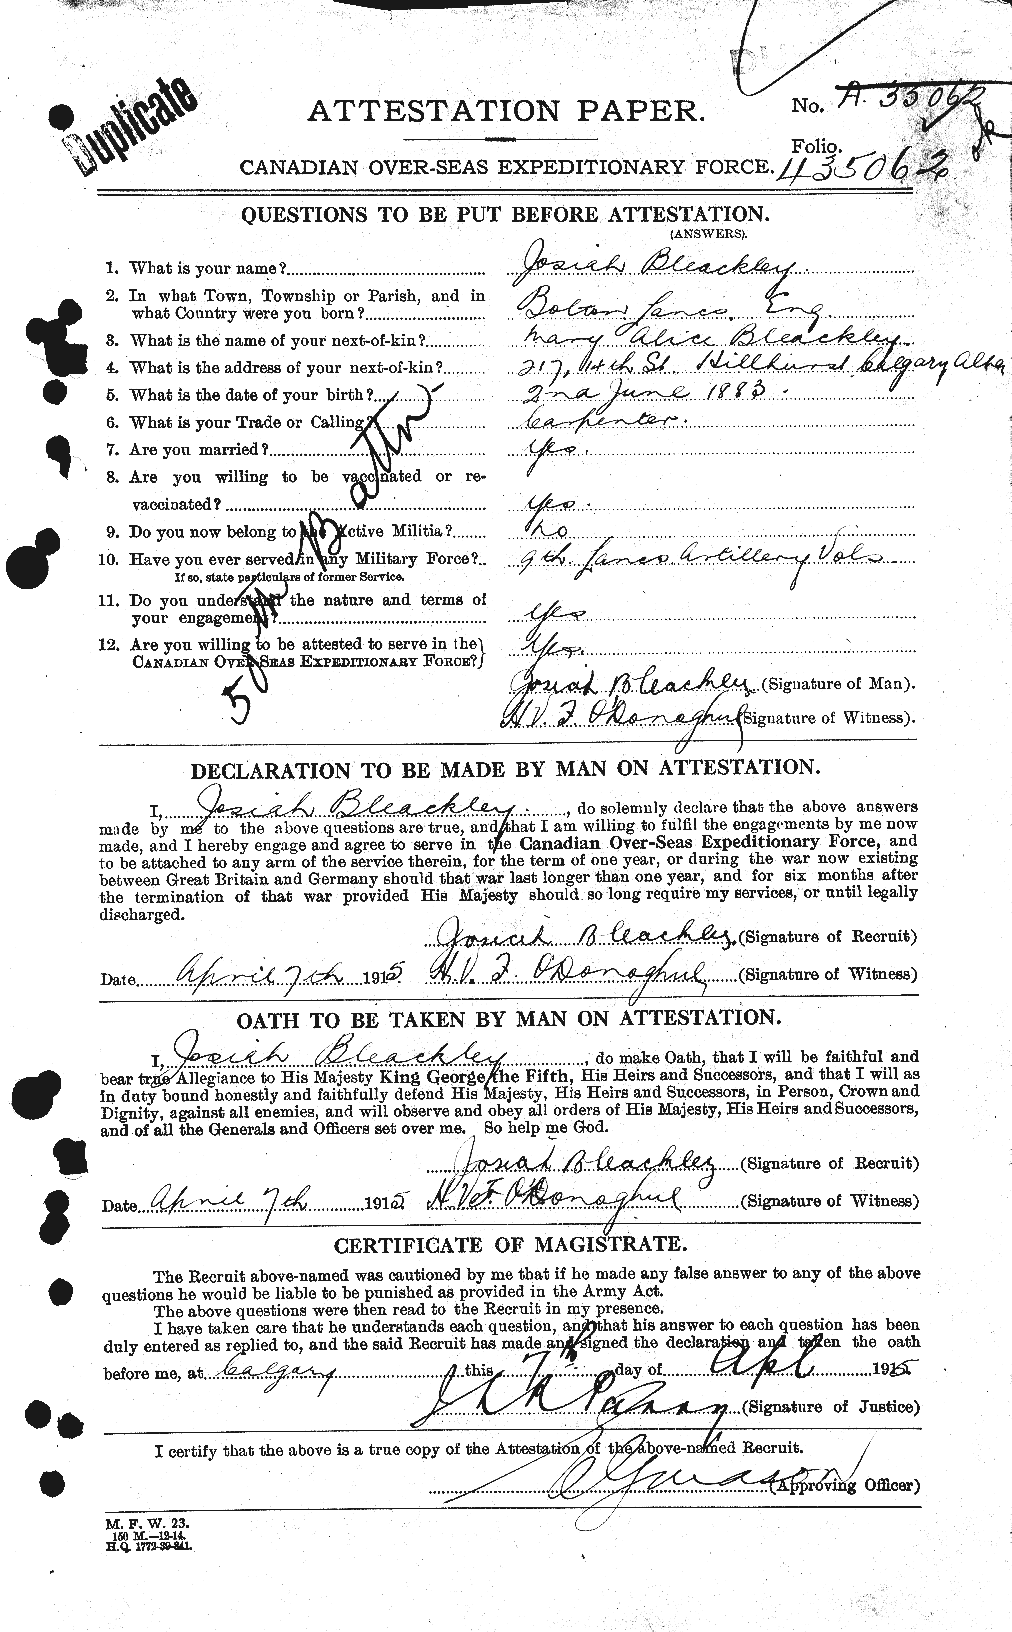 Personnel Records of the First World War - CEF 247881a